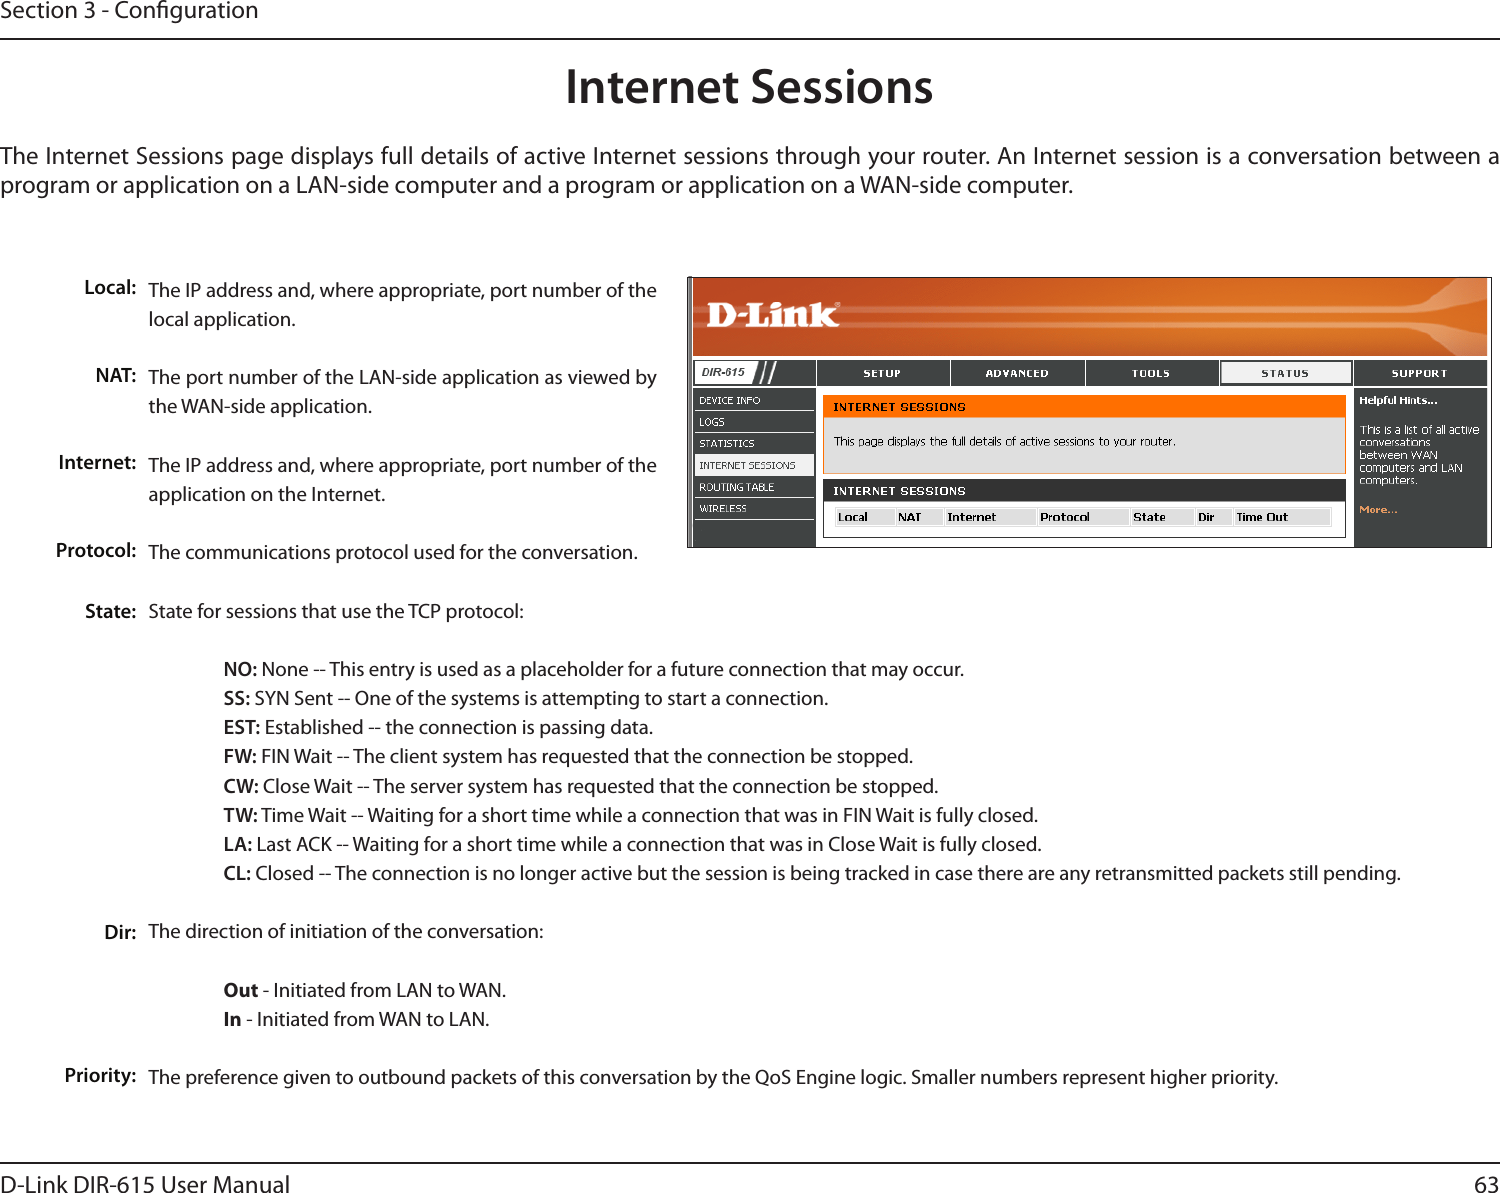 63D-Link DIR-615 User ManualSection 3 - CongurationInternet SessionsThe Internet Sessions page displays full details of active Internet sessions through your router. An Internet session is a conversation between a program or application on a LAN-side computer and a program or application on a WAN-side computer. Local:NAT:Internet:Protocol:State:Dir:Priority:The IP address and, where appropriate, port number of the local application. The port number of the LAN-side application as viewed by the WAN-side application. The IP address and, where appropriate, port number of the application on the Internet. The communications protocol used for the conversation. State for sessions that use the TCP protocol: NO: None -- This entry is used as a placeholder for a future connection that may occur. SS: SYN Sent -- One of the systems is attempting to start a connection. EST: Established -- the connection is passing data. FW: FIN Wait -- The client system has requested that the connection be stopped. CW: Close Wait -- The server system has requested that the connection be stopped. TW: Time Wait -- Waiting for a short time while a connection that was in FIN Wait is fully closed. LA: Last ACK -- Waiting for a short time while a connection that was in Close Wait is fully closed.  CL: Closed -- The connection is no longer active but the session is being tracked in case there are any retransmitted packets still pending.The direction of initiation of the conversation:   Out - Initiated from LAN to WAN.  In - Initiated from WAN to LAN.The preference given to outbound packets of this conversation by the QoS Engine logic. Smaller numbers represent higher priority. 